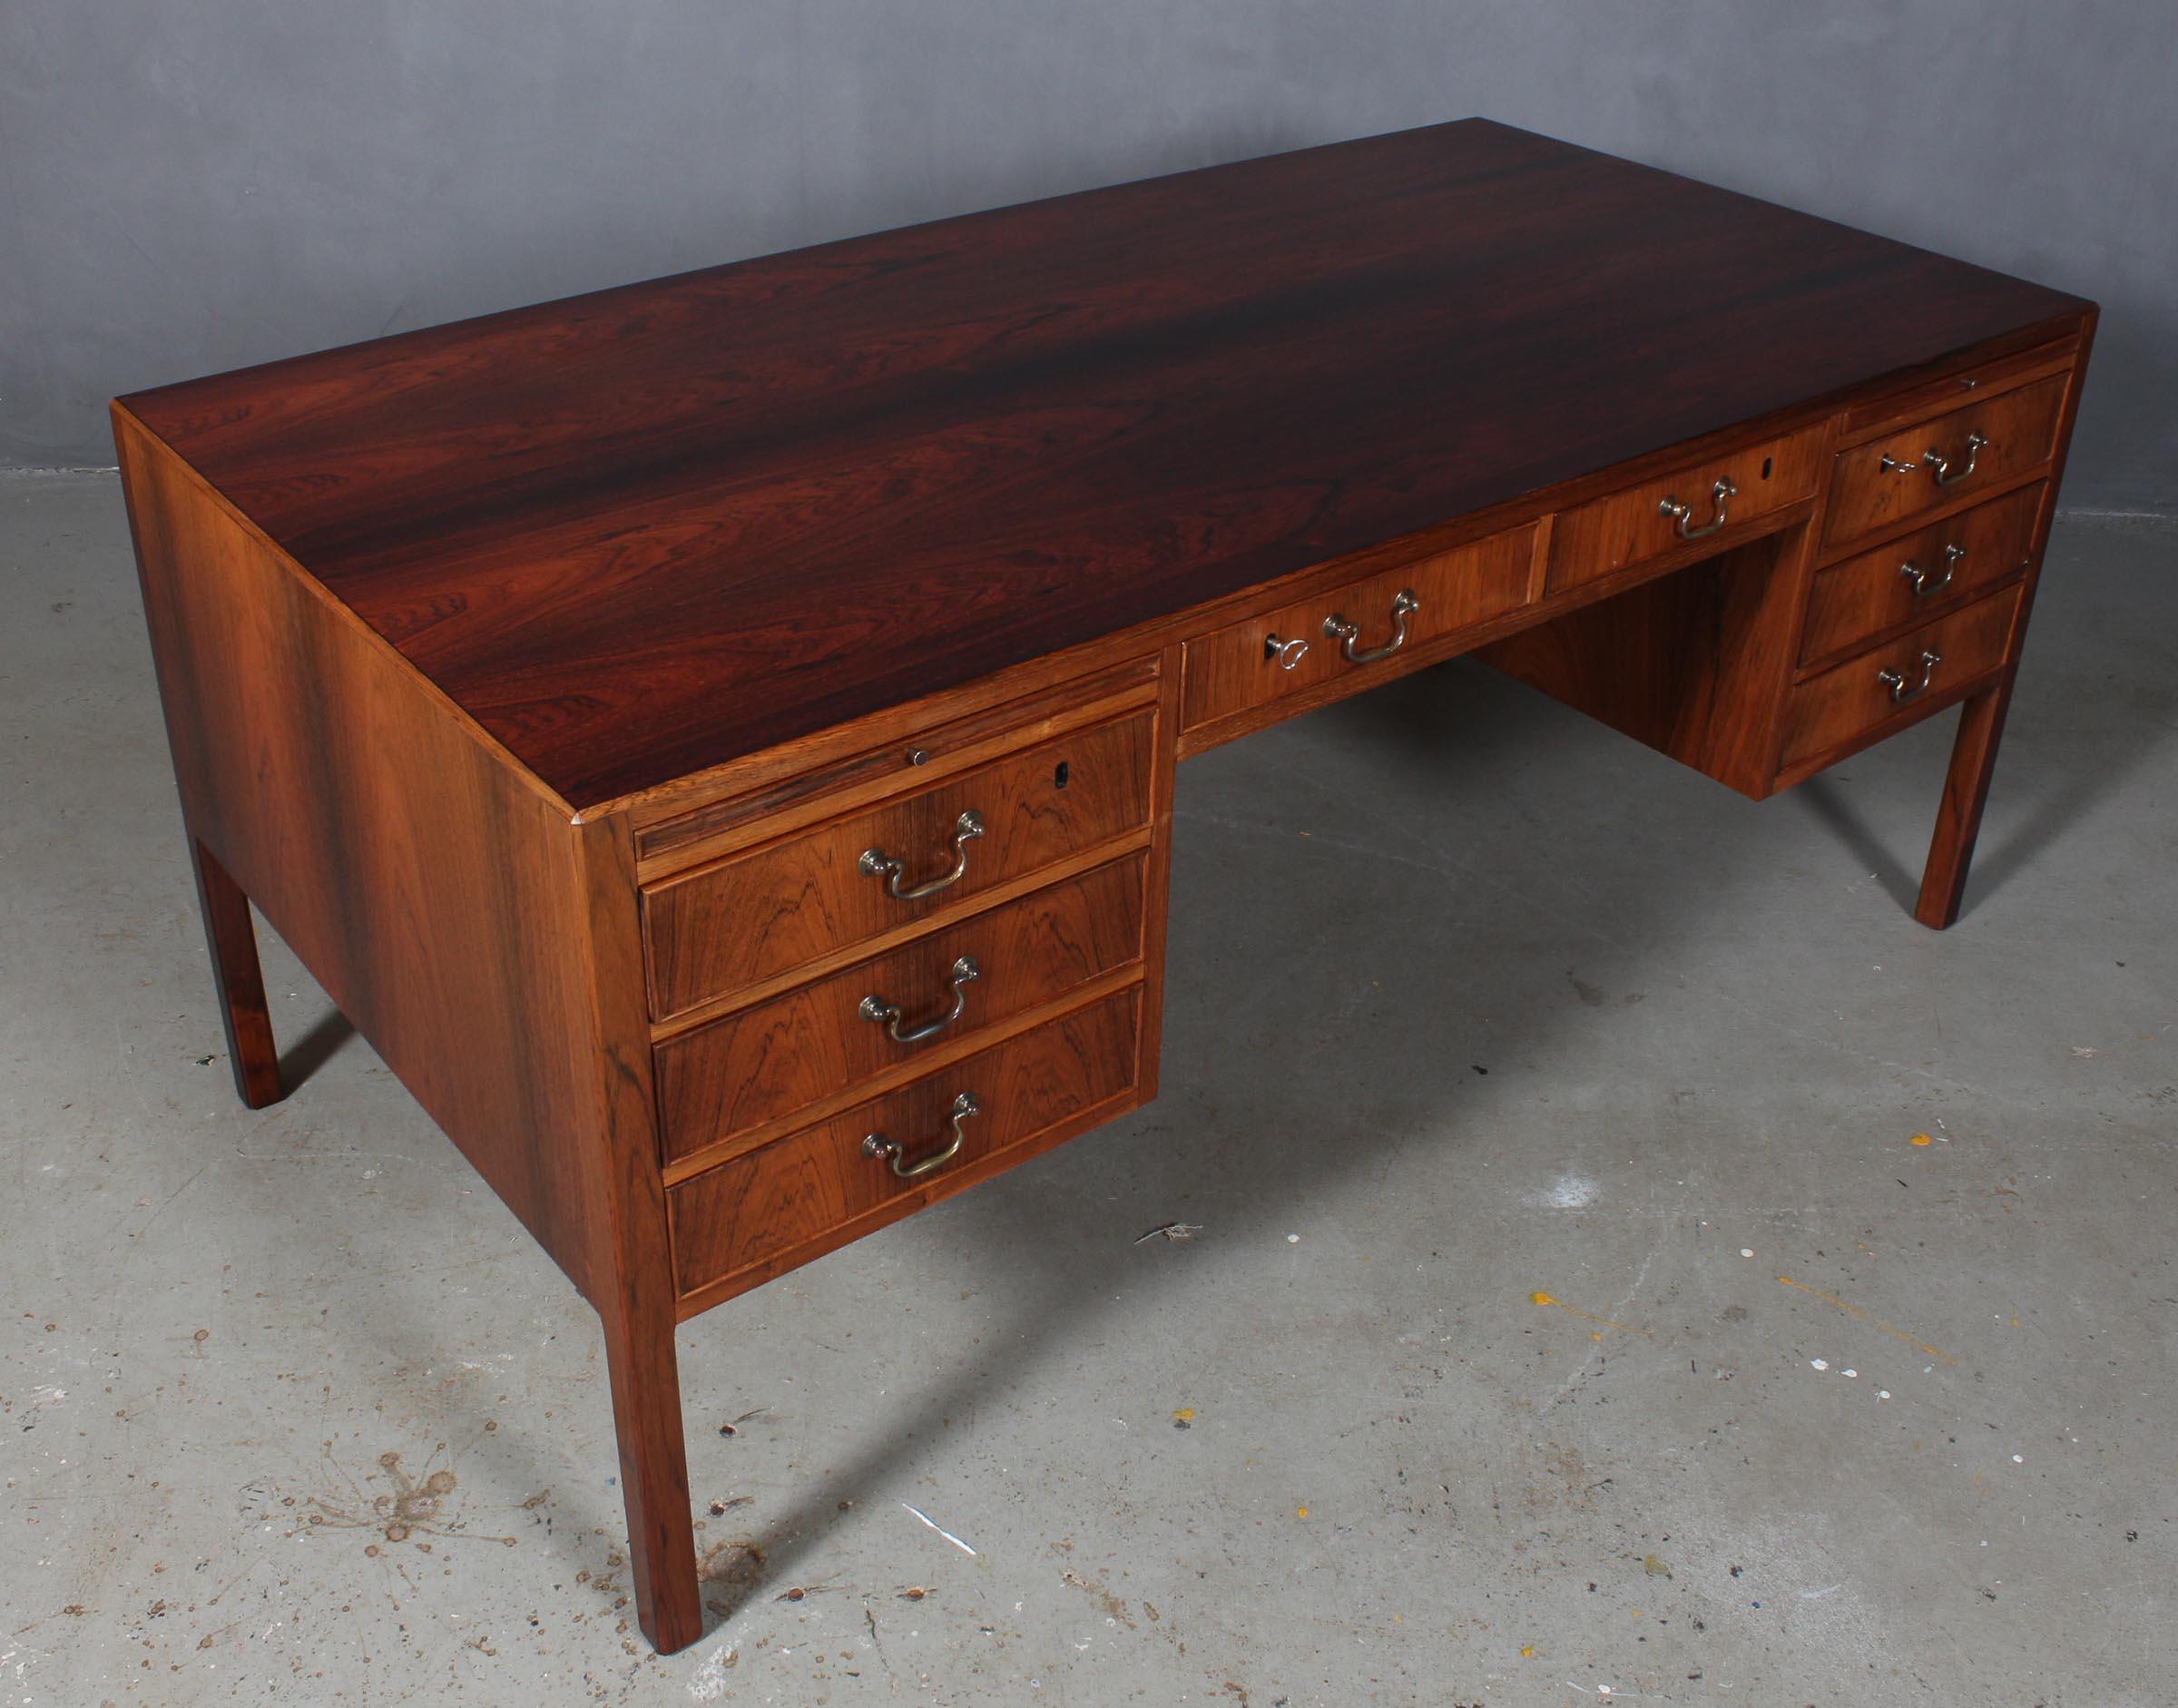 O. Bank Larsen writing desk in rosewood. With drawers, doors and trays. Rich details. Two keys included.

Made in the 1950s in the style of Ole Wanscher.